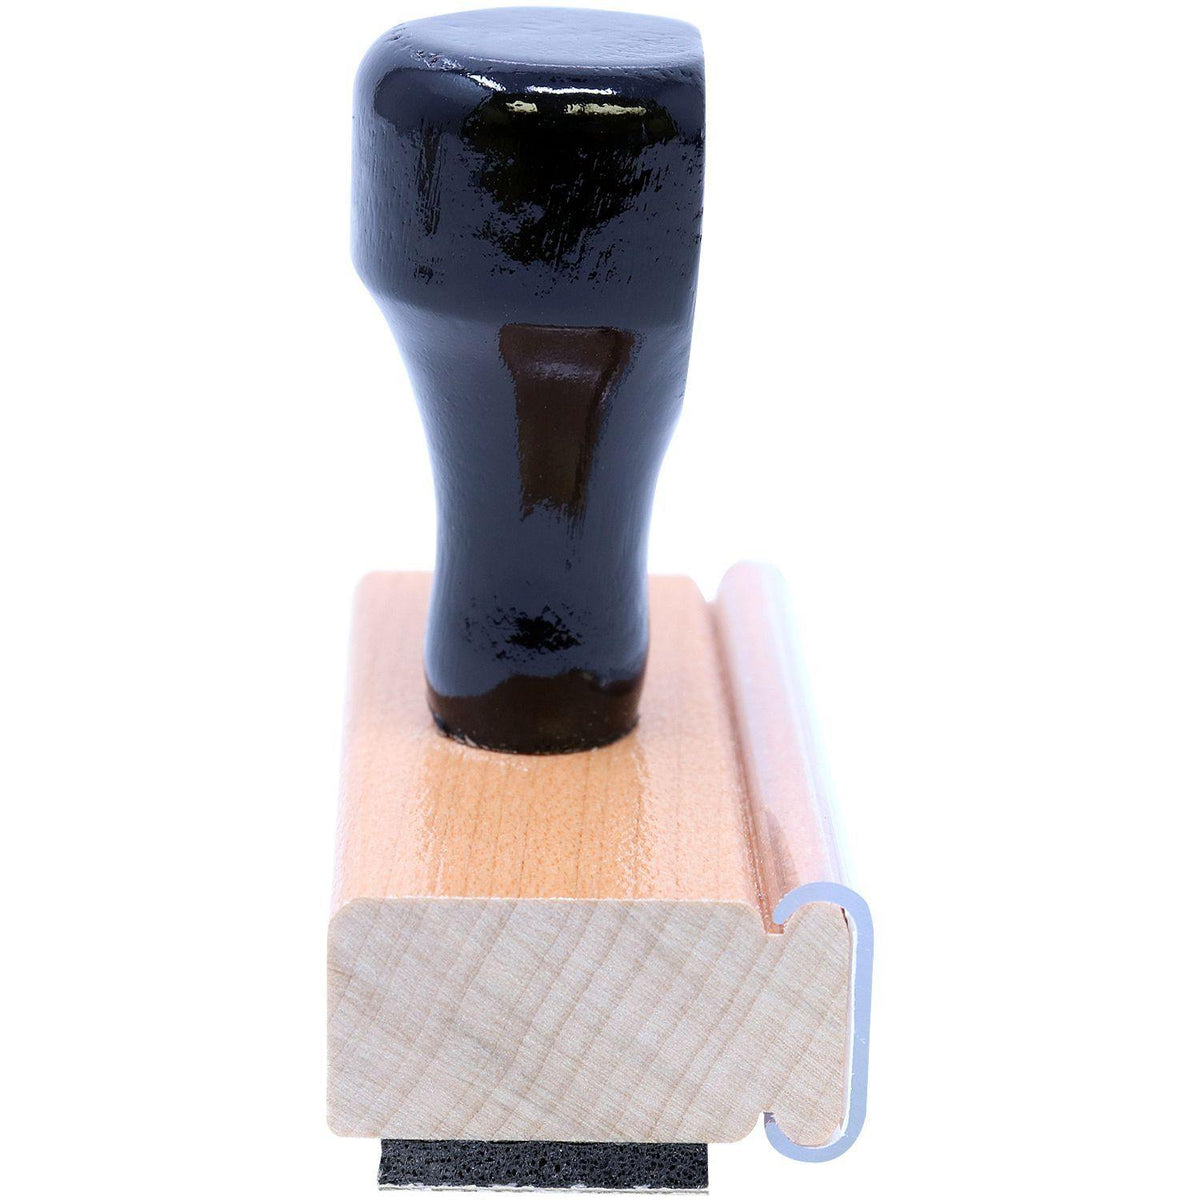 Promoted Rubber Stamp - Engineer Seal Stamps - Brand_Acorn, Impression Size_Small, Stamp Type_Regular Stamp, Type of Use_Business, Type of Use_General, Type of Use_Office, Type of Use_Professional